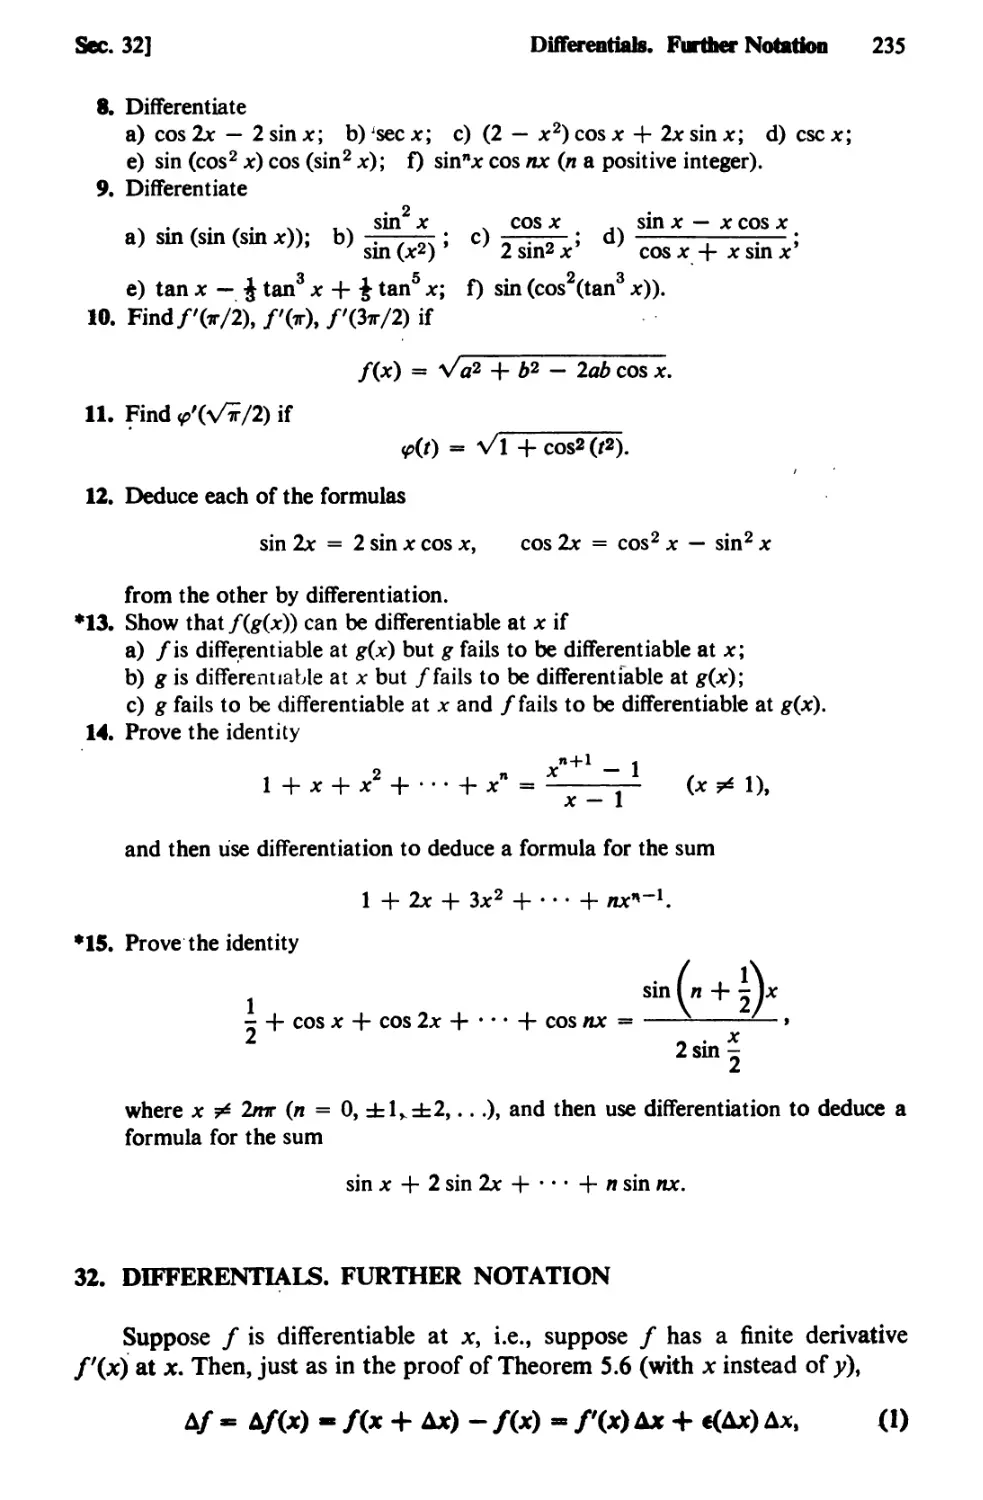 32. Differentials. Further Notation